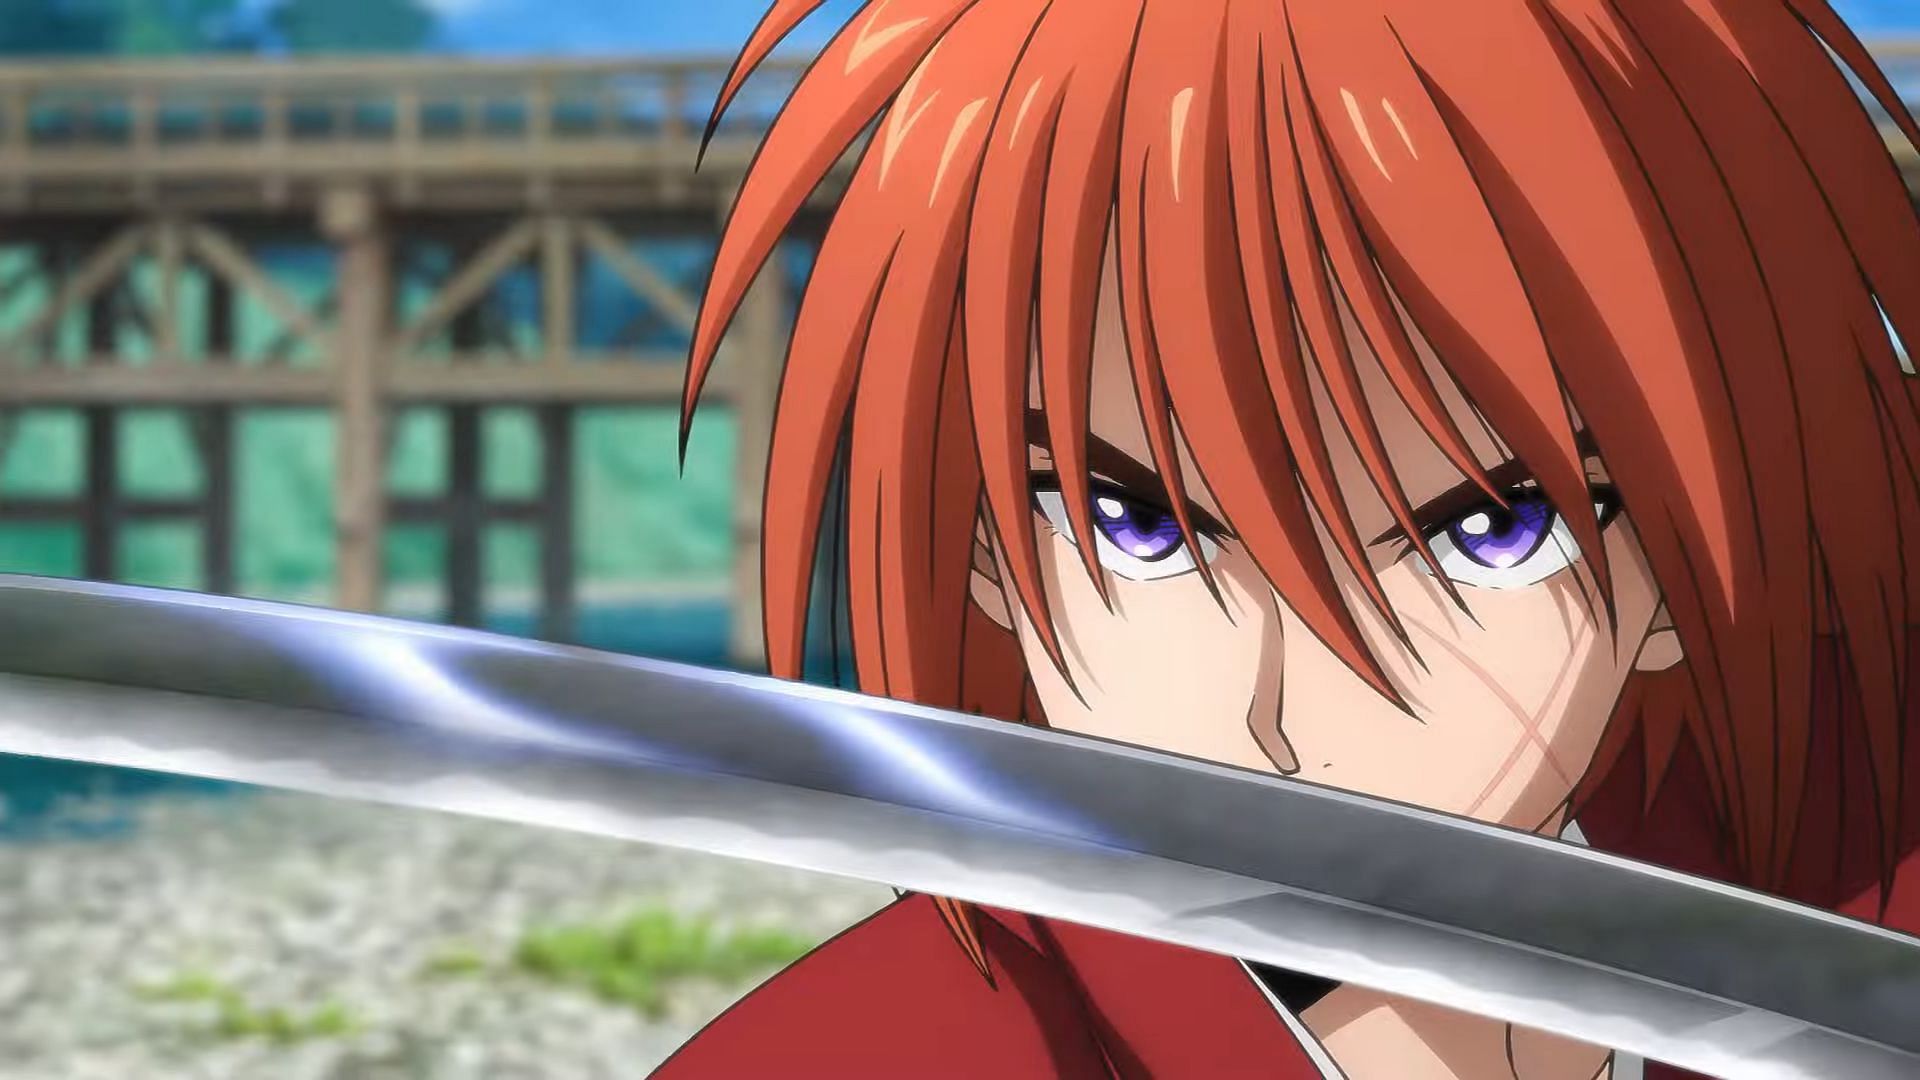 Rurouni Kenshin episode 6: Release date and time, countdown, where to watch, and more (Image via Liden Films)